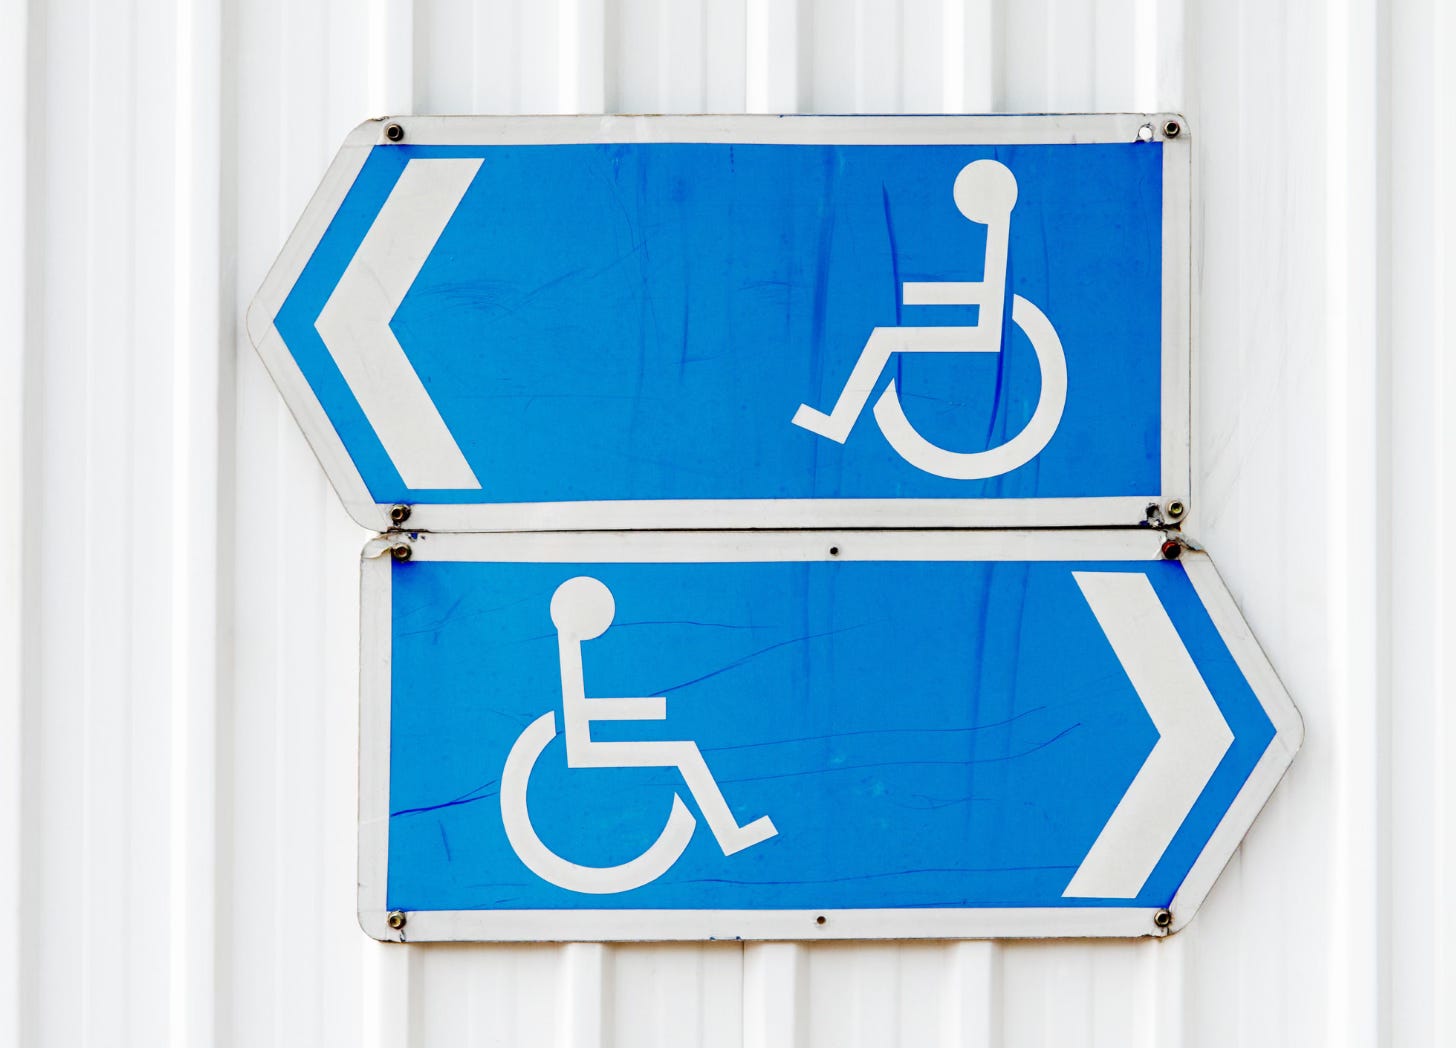 Two wheelchair symbol signed with arrows pointing in opposite directions